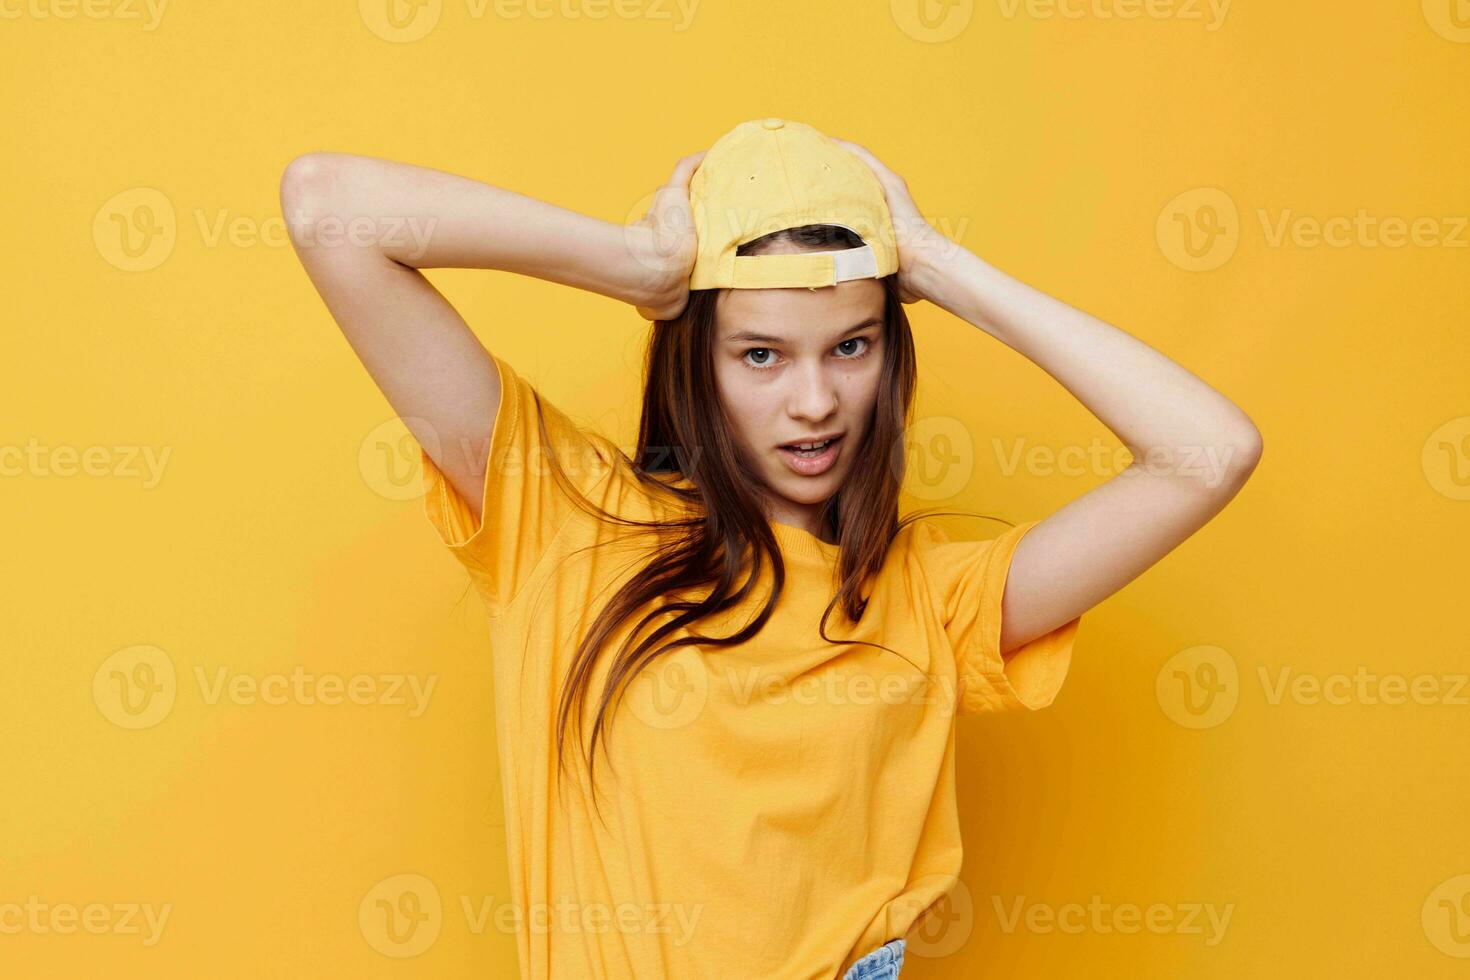 optimistic young woman posing in a yellow T-shirt and cap yellow background photo